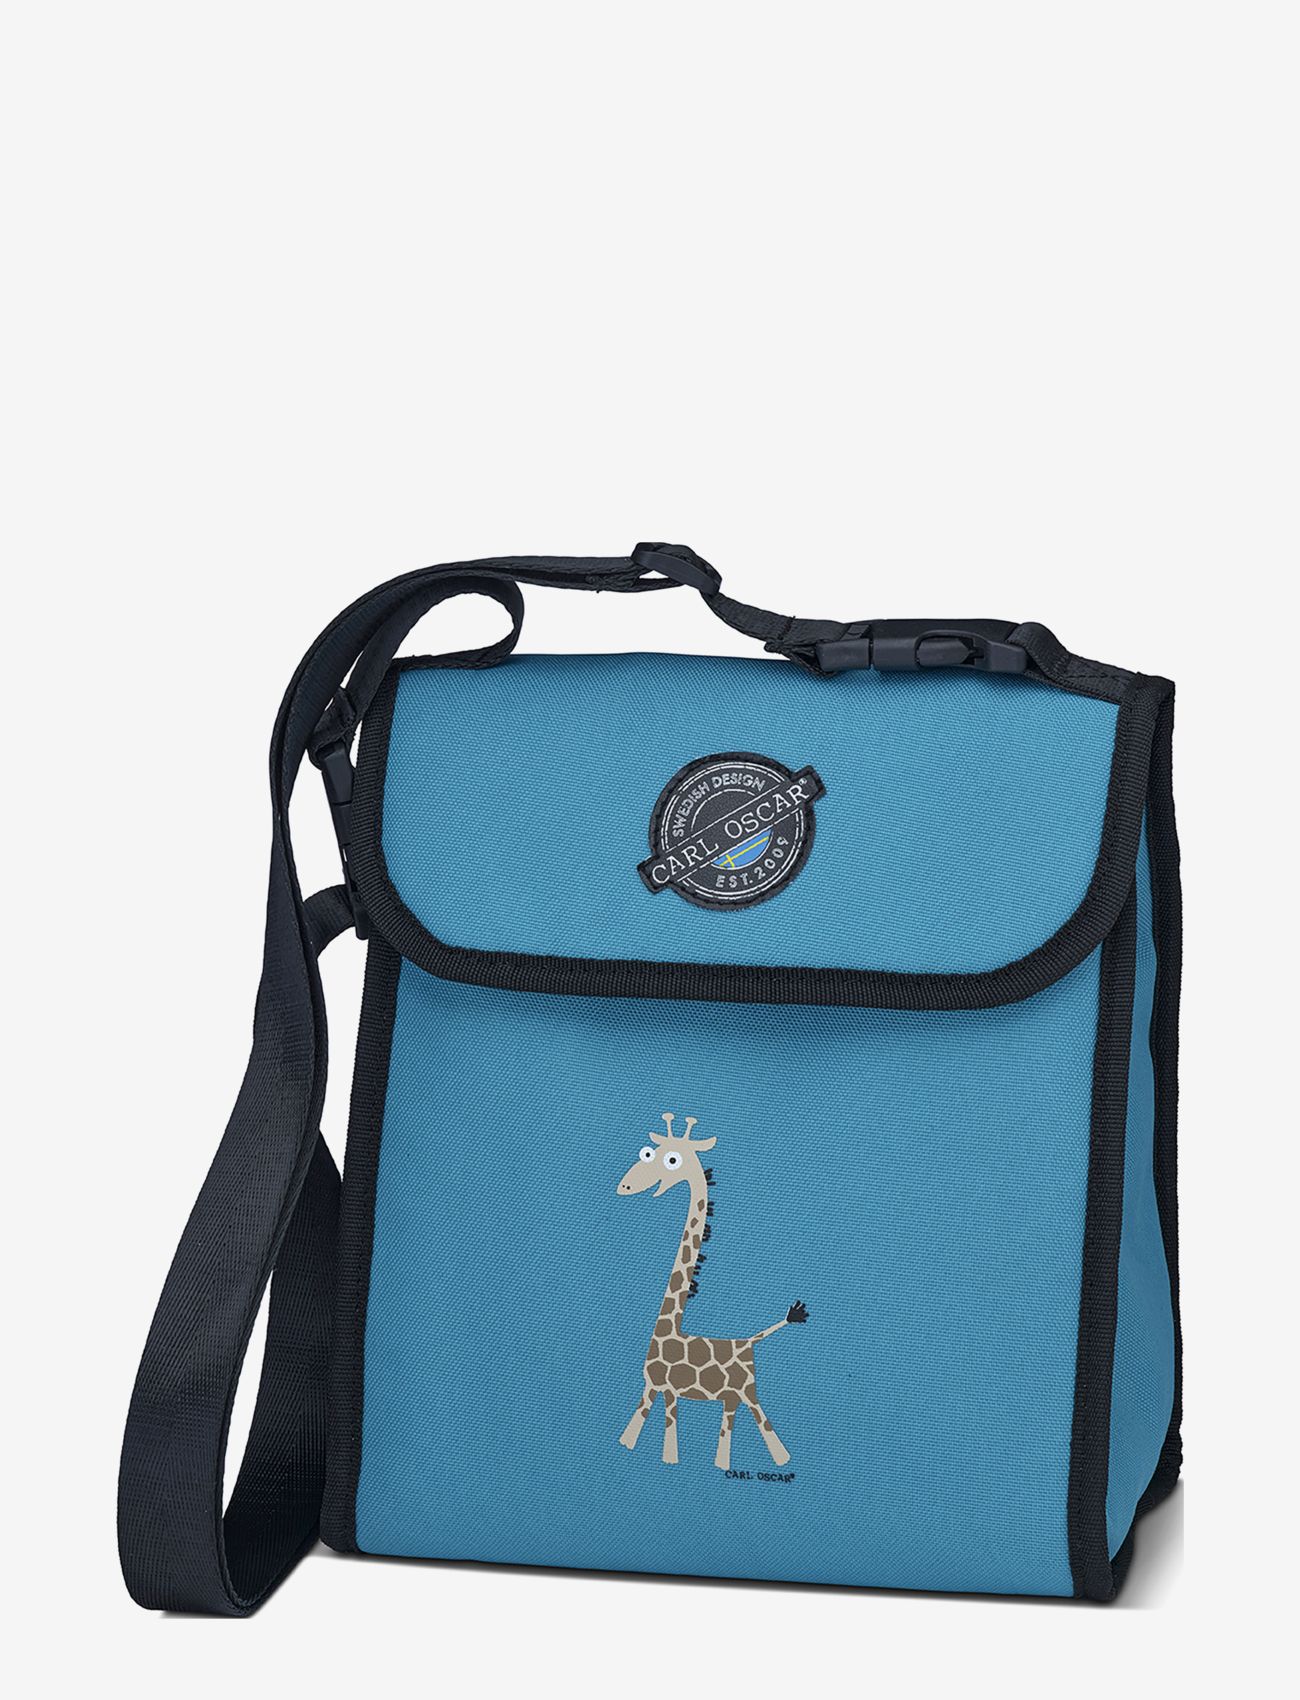 Carl Oscar - Pack n' Snack™ Cooler Bag 5  L - Turquoise - travel bags - turquoise - 1